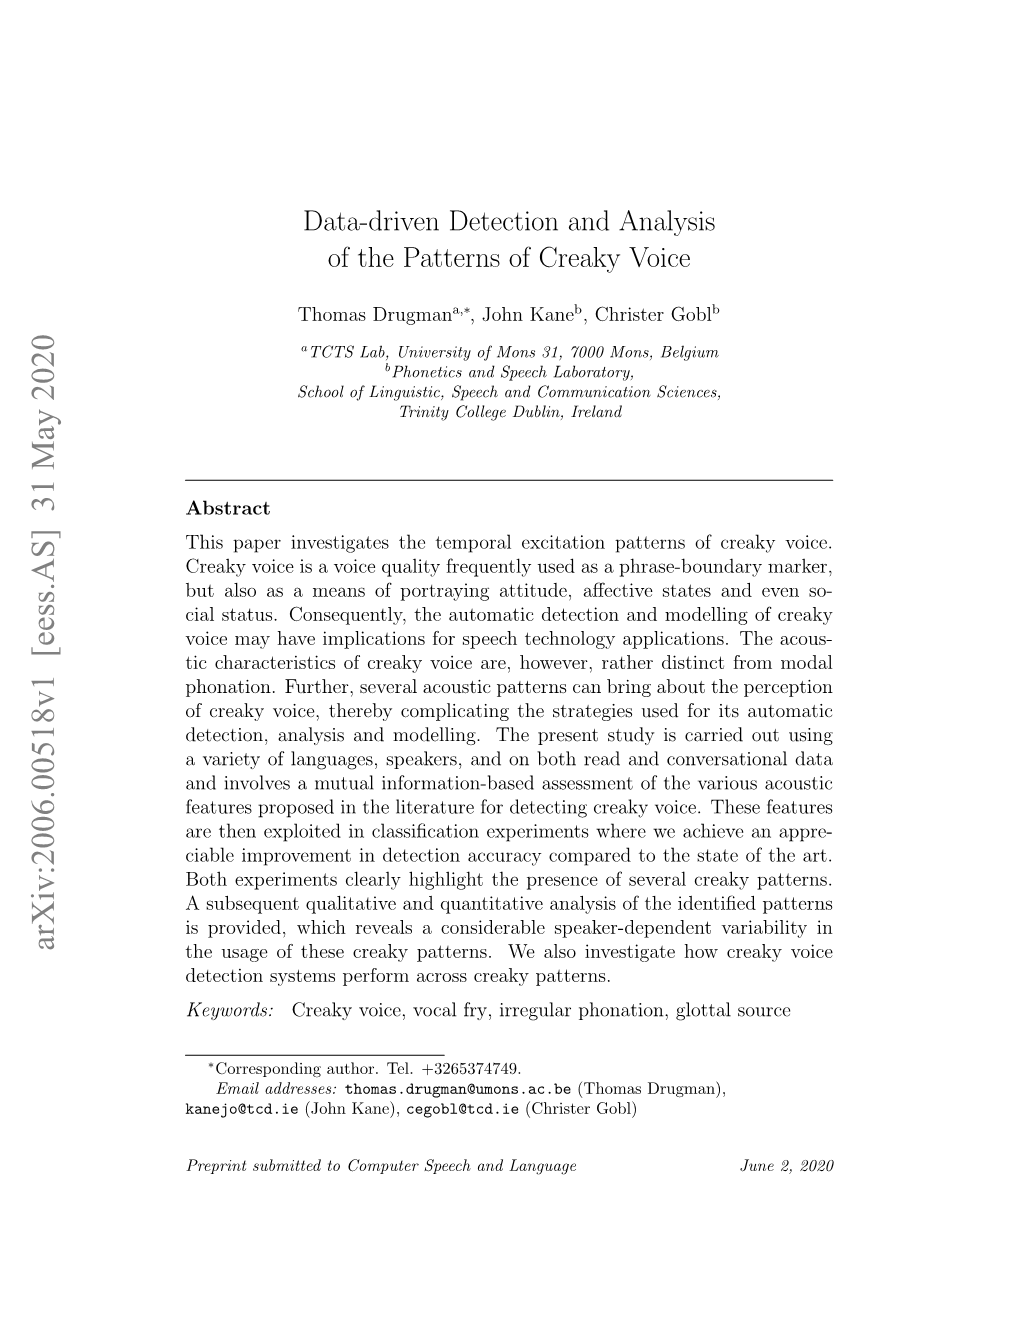 Data-Driven Detection and Analysis of the Patterns of Creaky Voice